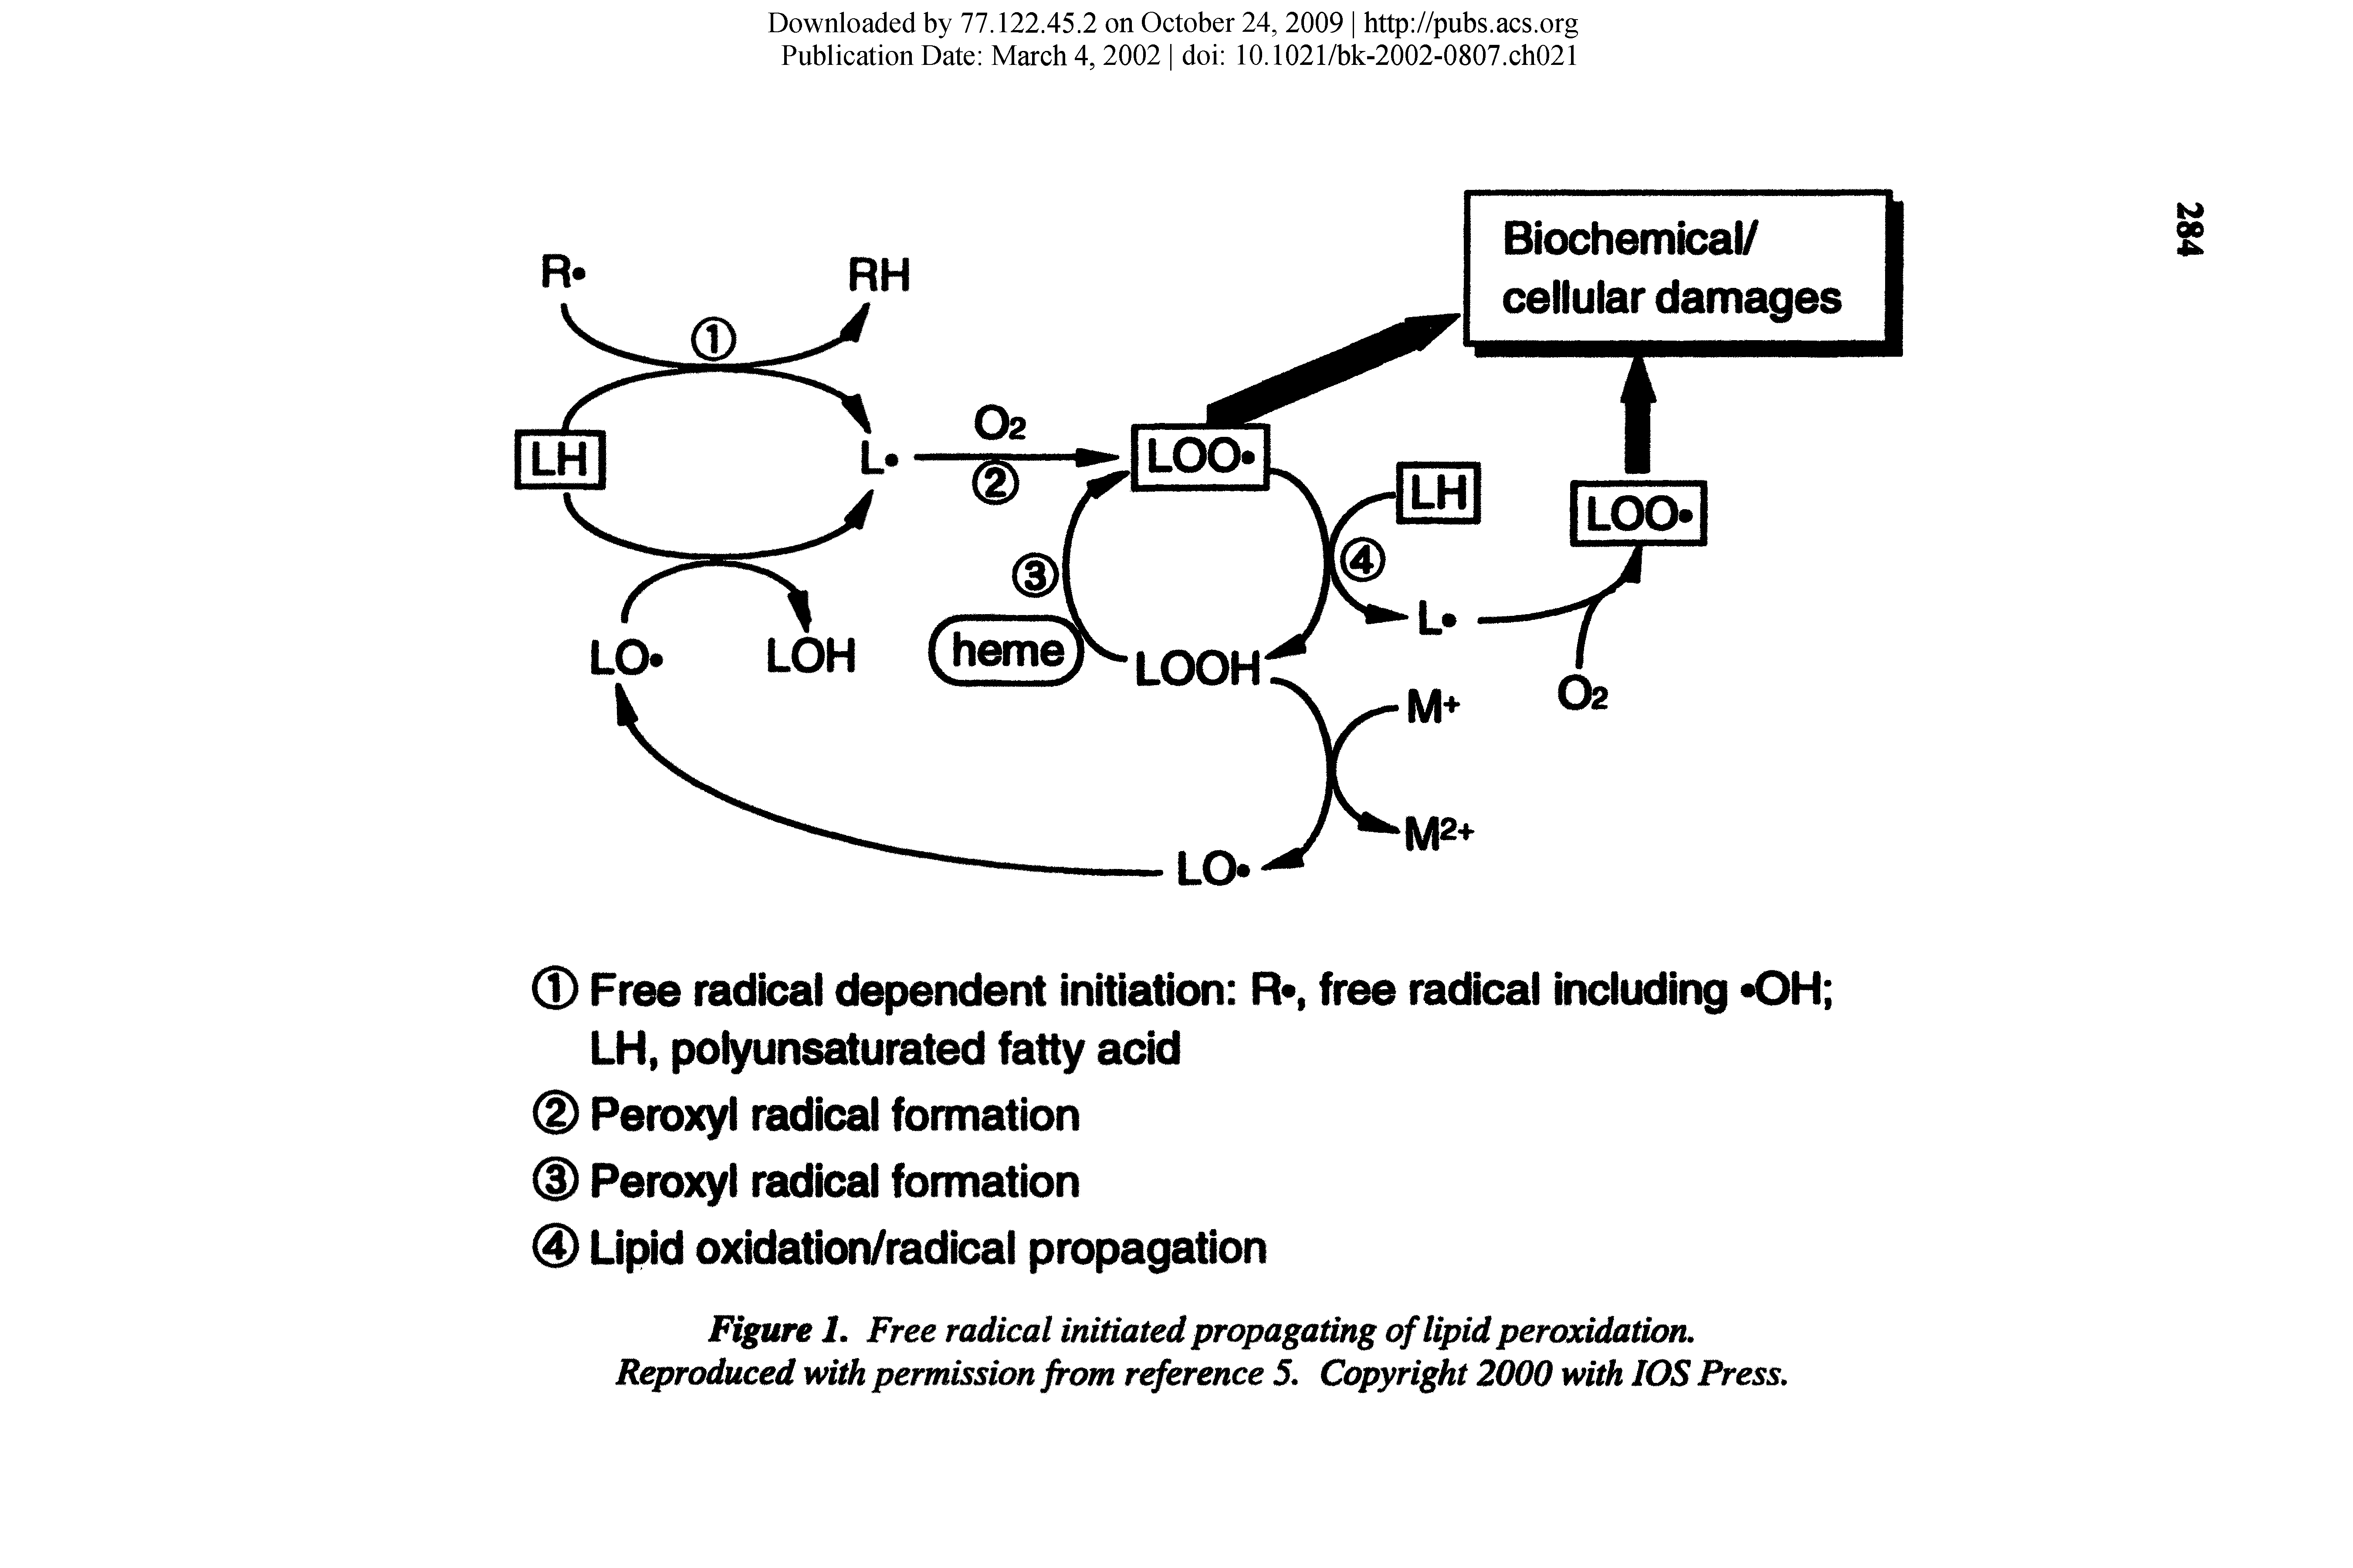 Figure L Free radical initiated propagating of lipid peroxidation. Reproduced with permission from reference 5. Copyright 2000 with lOS Press.